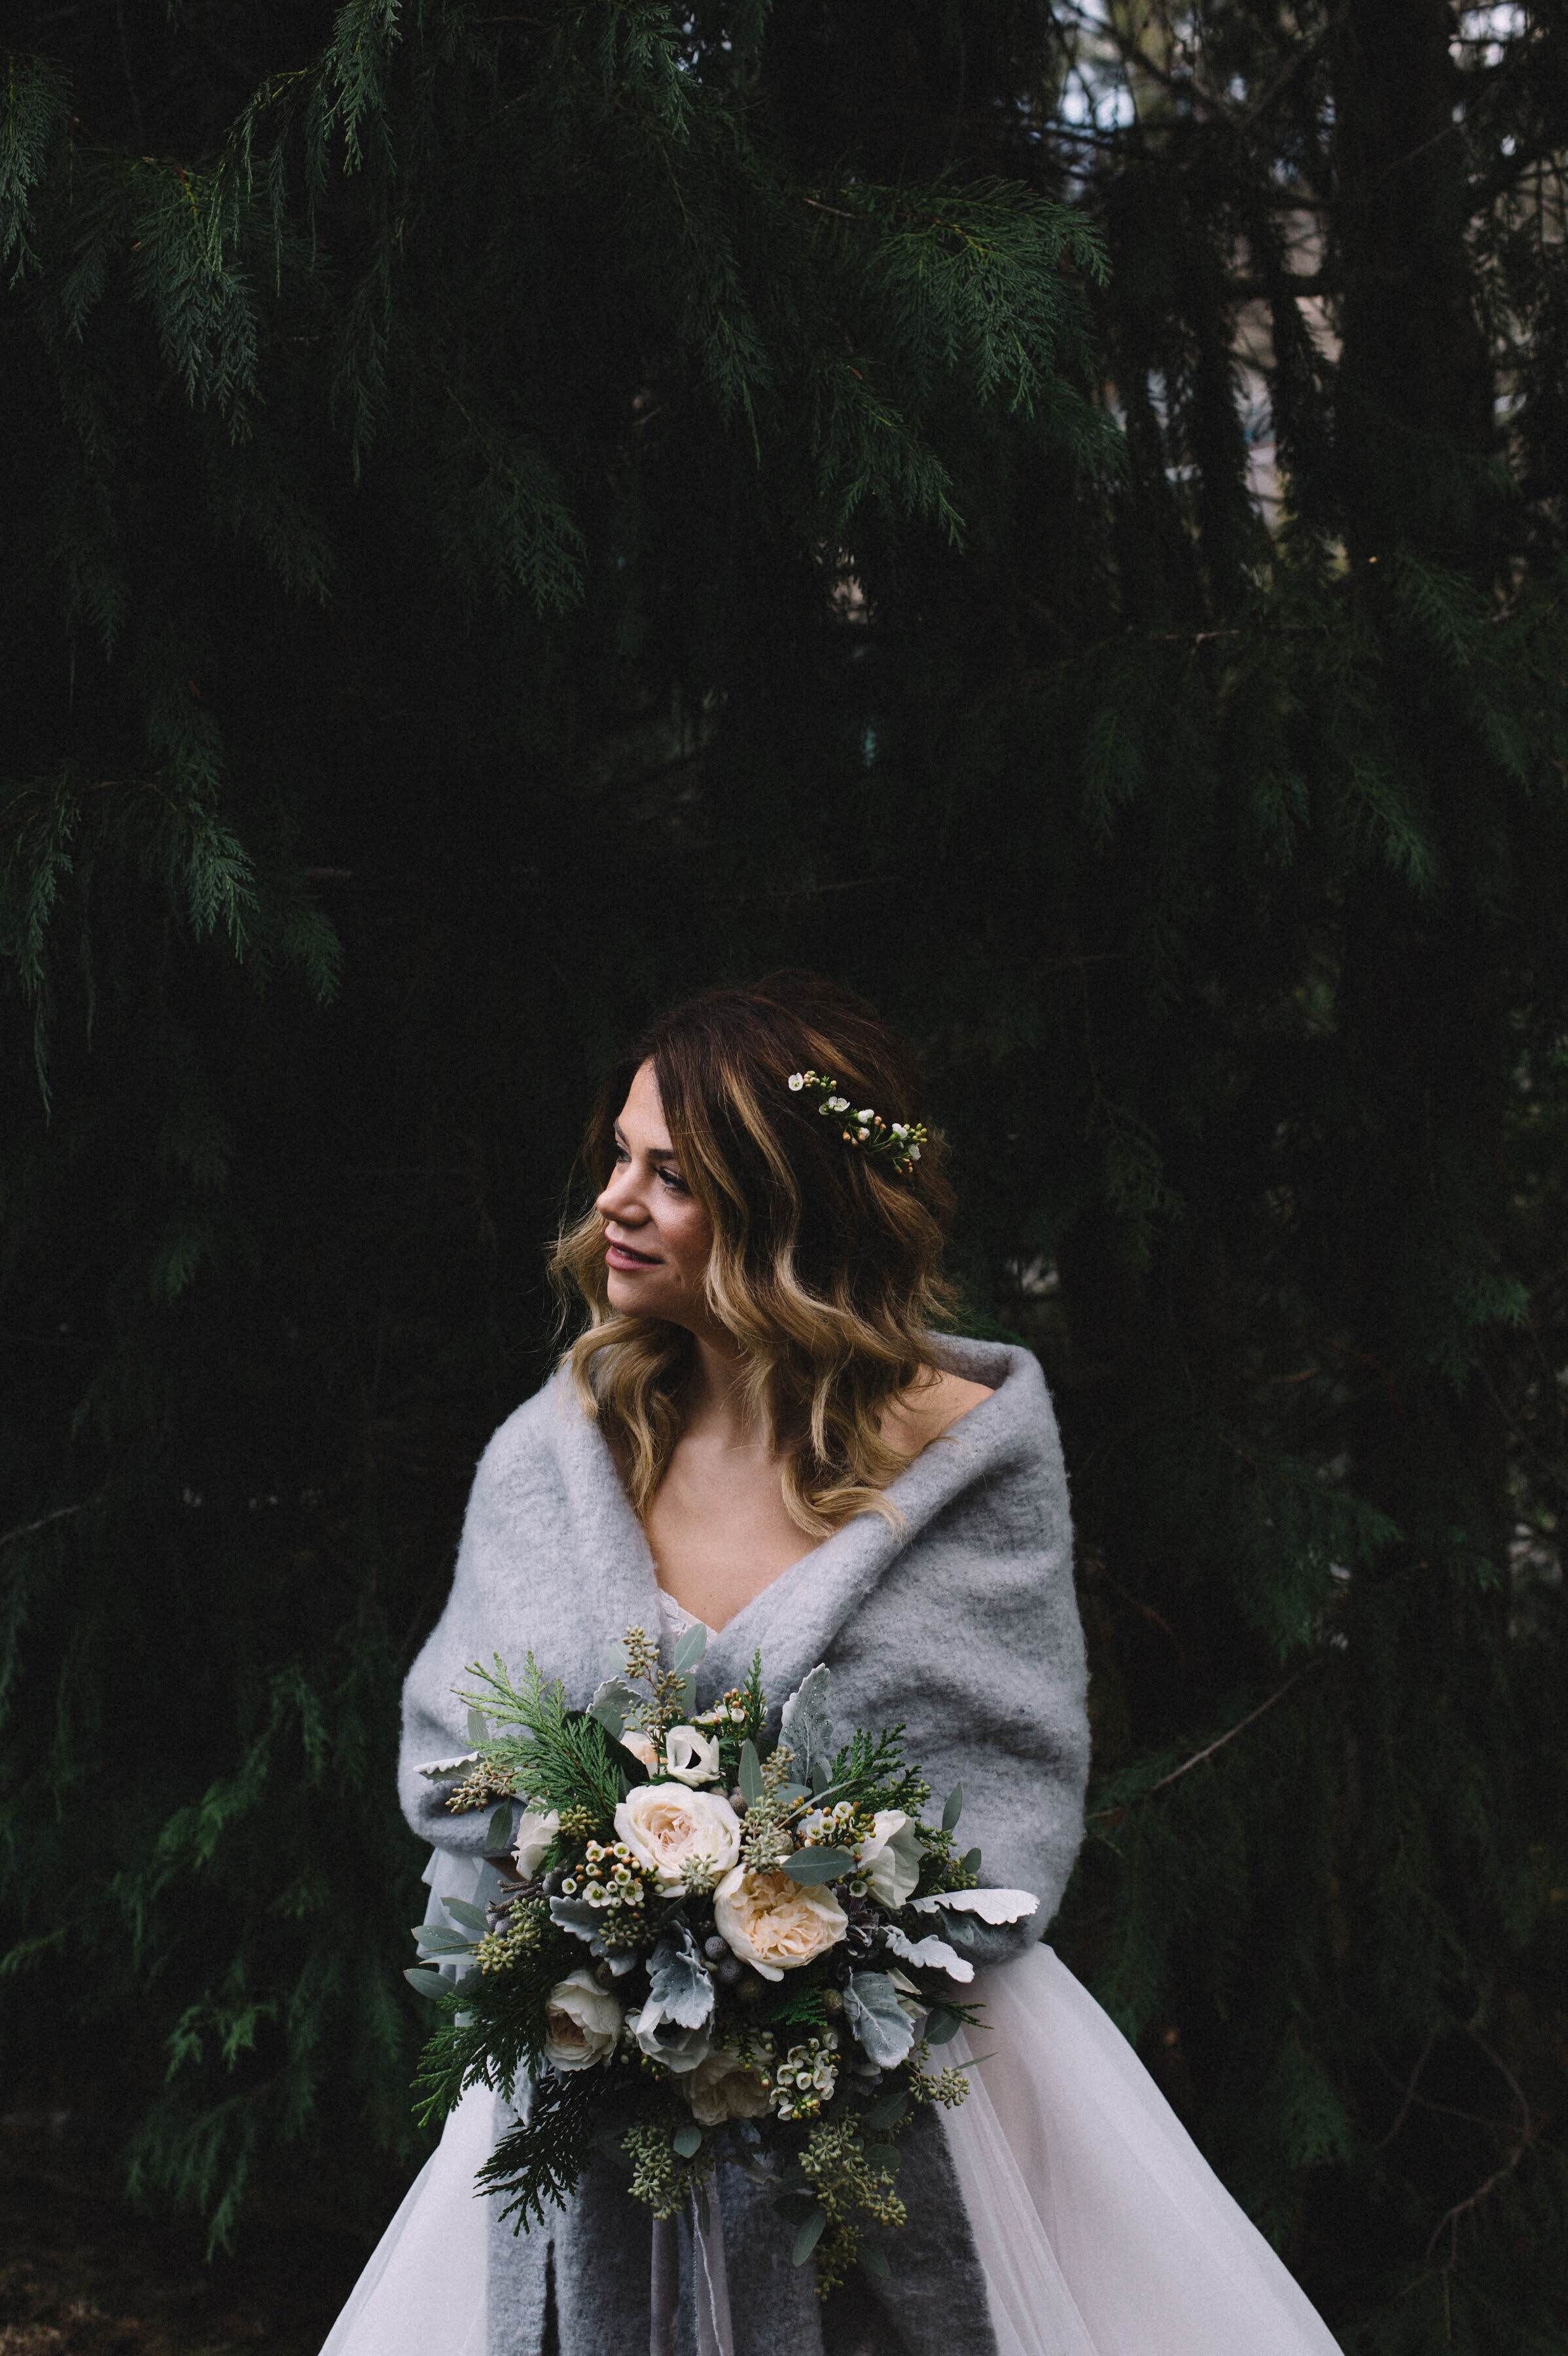 The Five Winter Wedding Dress Trends for Plus Size Brides